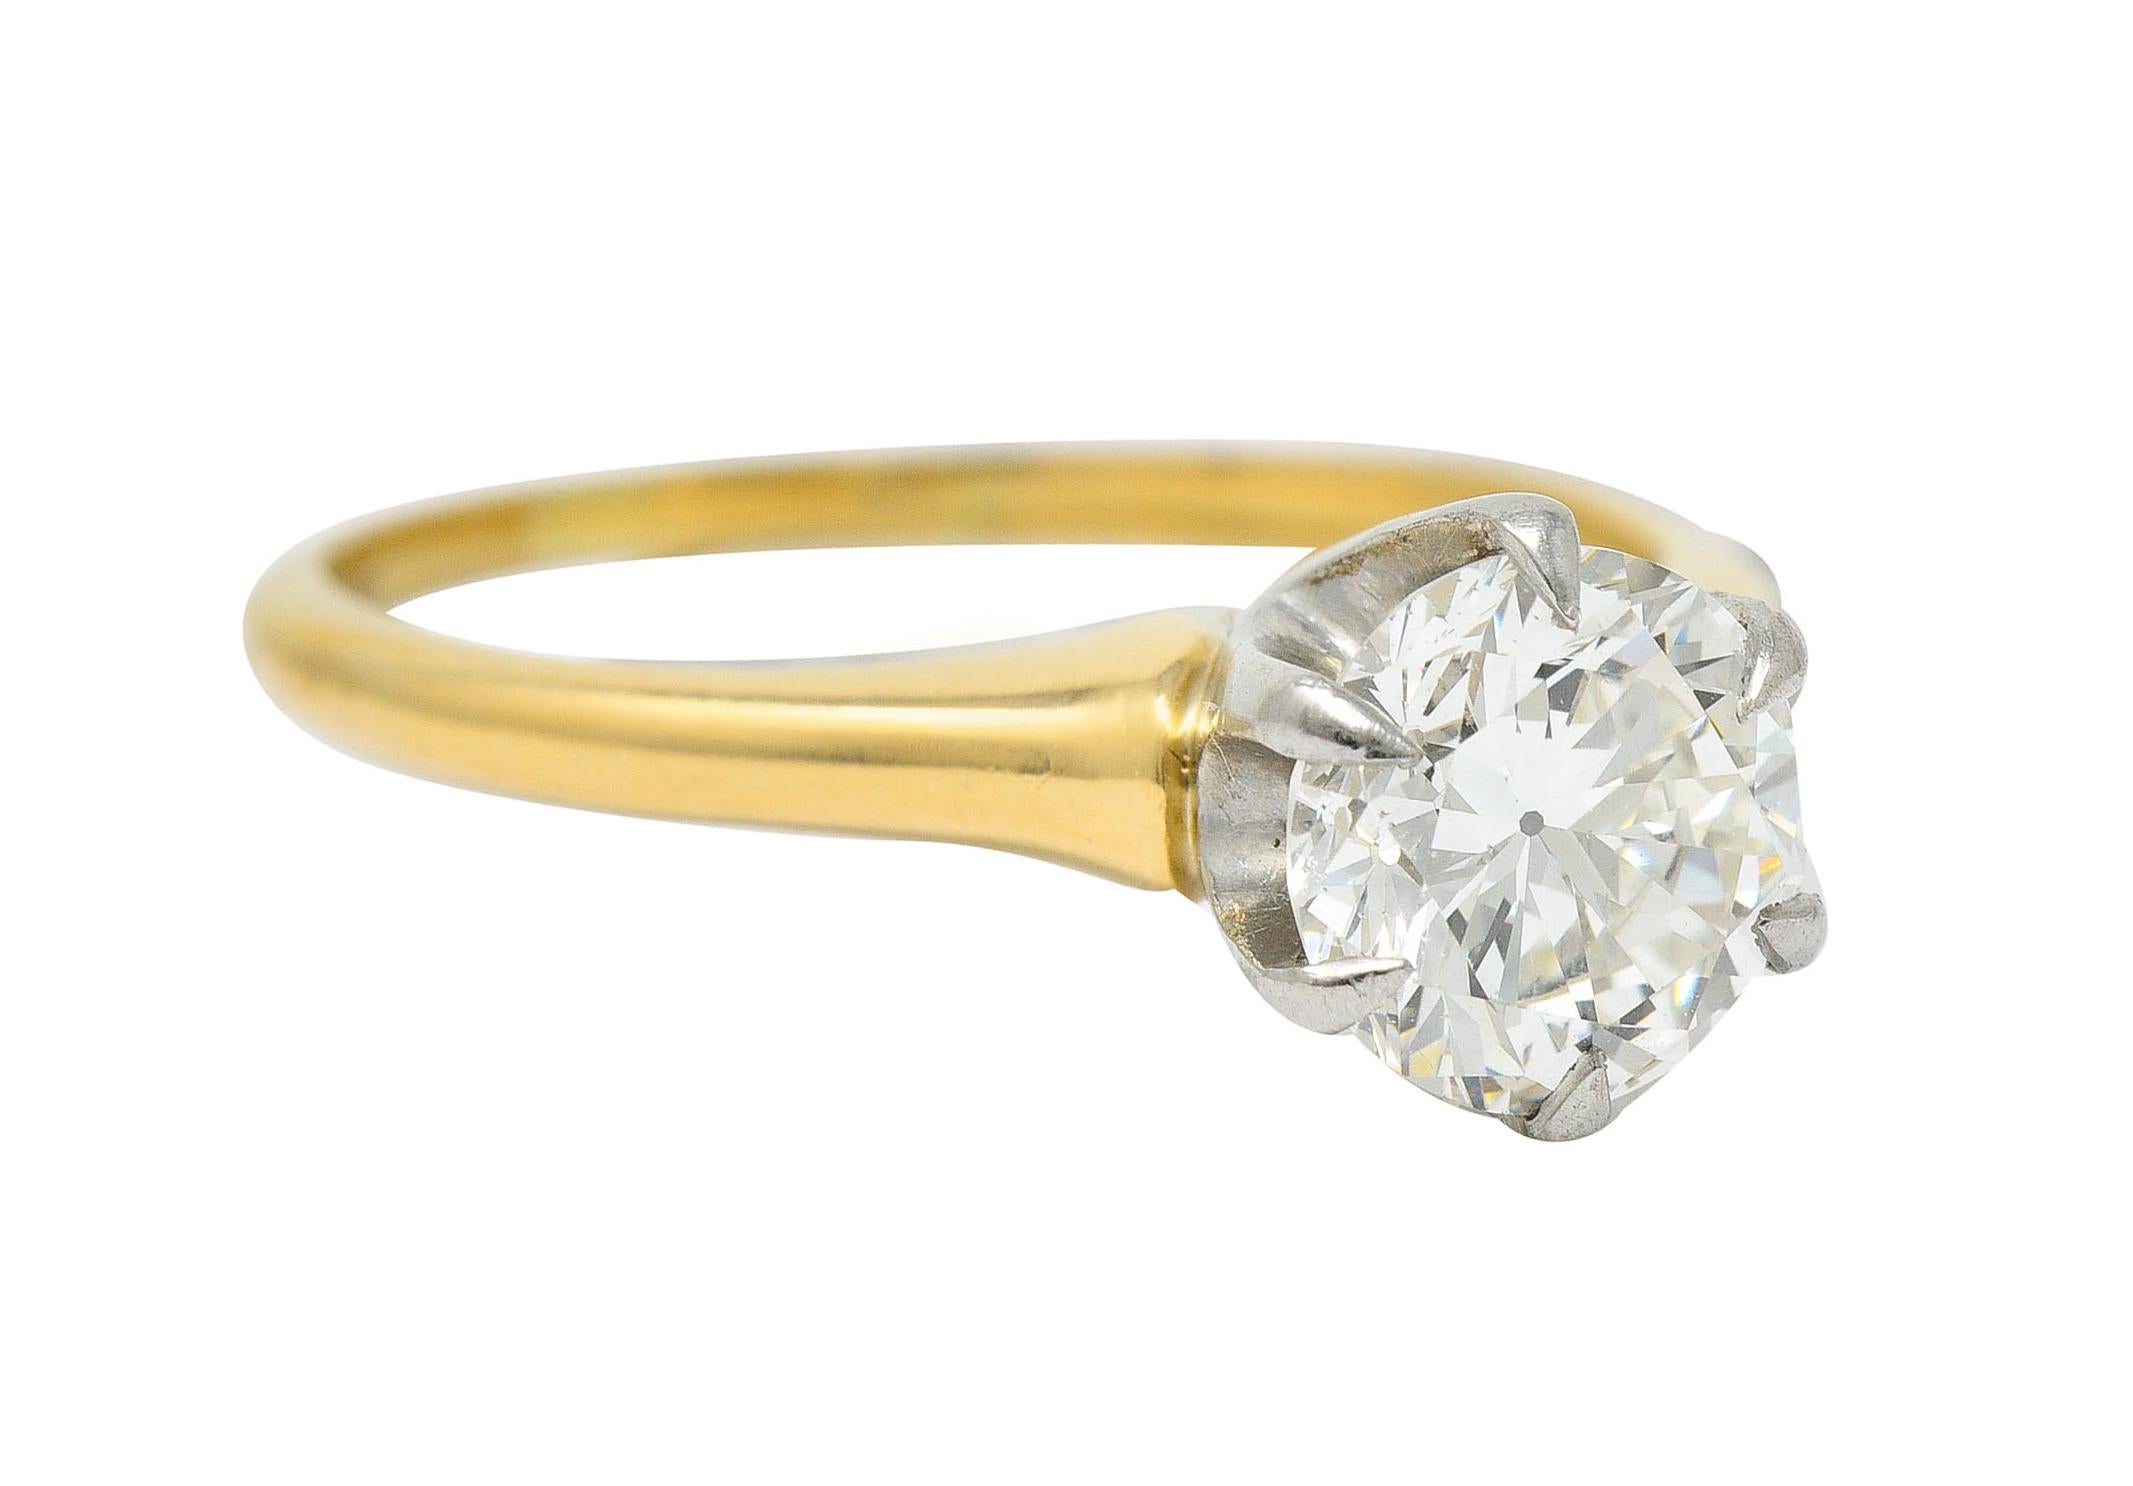 Classic solitaire ring centers a round brilliant cut diamond in a six pronged white gold head

Weighing 1.19 carats with J color and SI1 clarity

Completed by a yellow gold shank

With maker's mark and stamped 14K for 14 karat gold

Numbered and